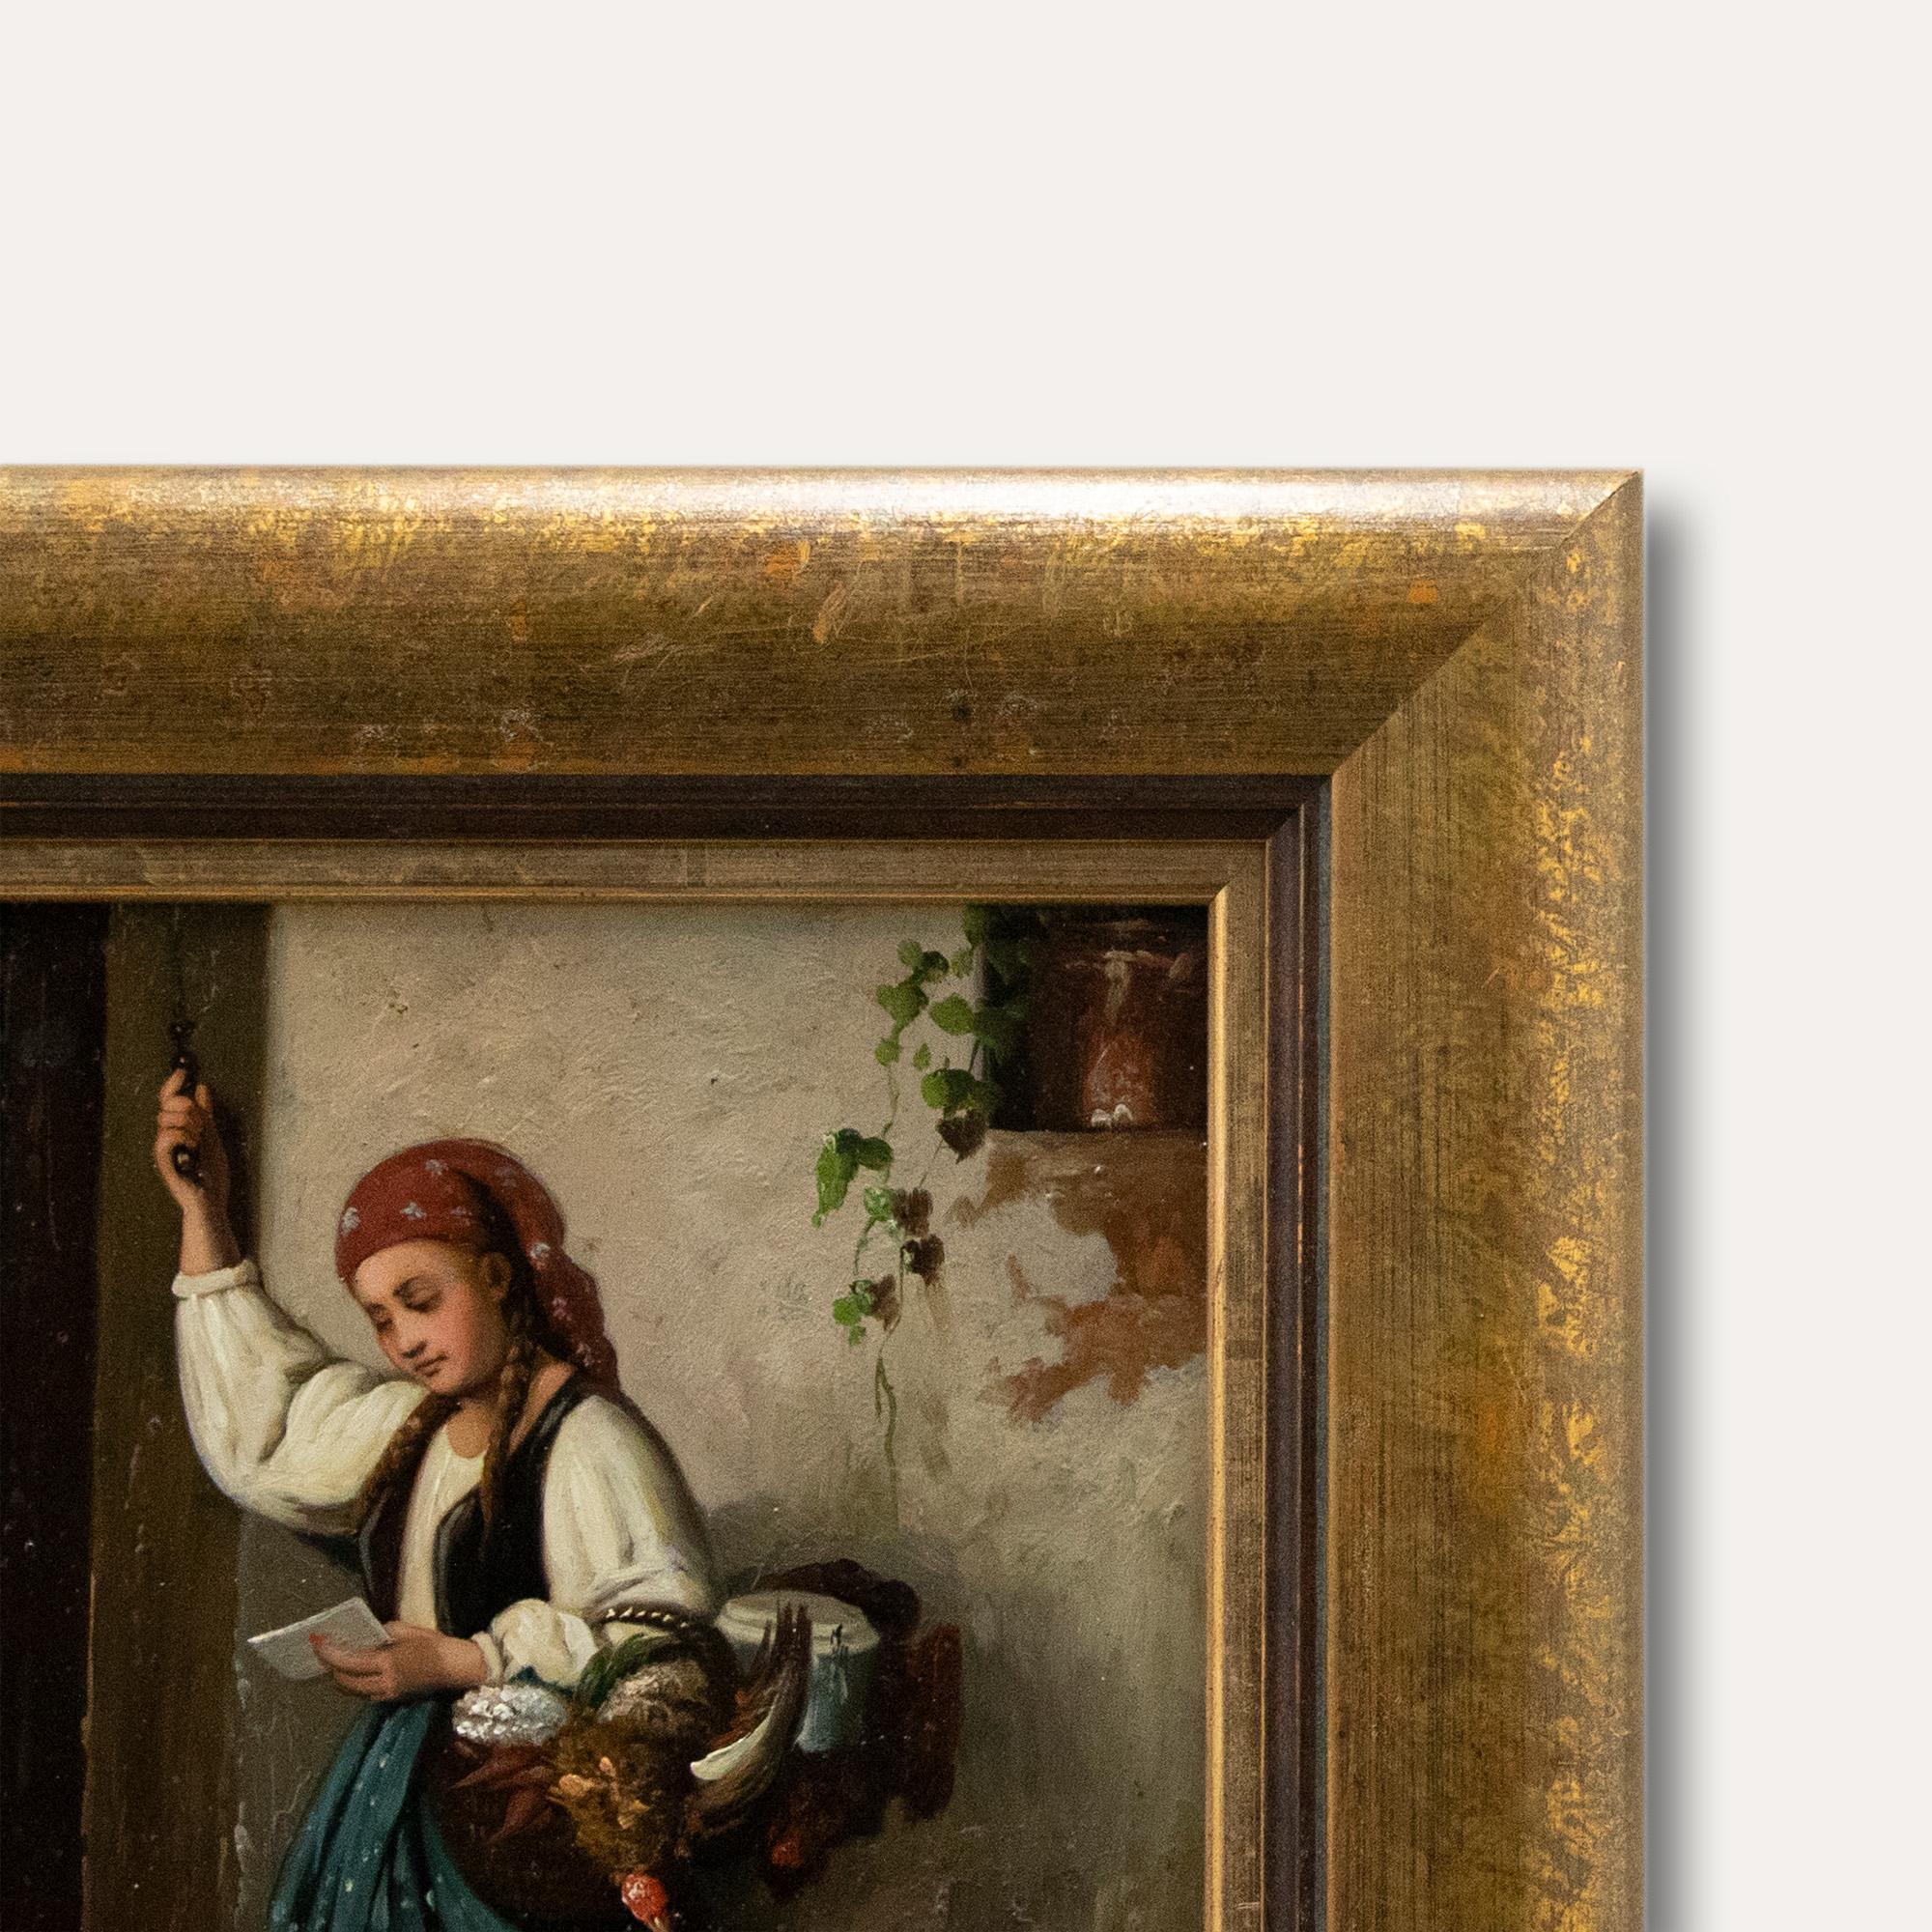 A delightful genre scene in oil, showing a 19th century delivery girl making her rounds with fresh produce. Well-presented in a substantial gilt-effect frame. Indistinctly signed. On board.